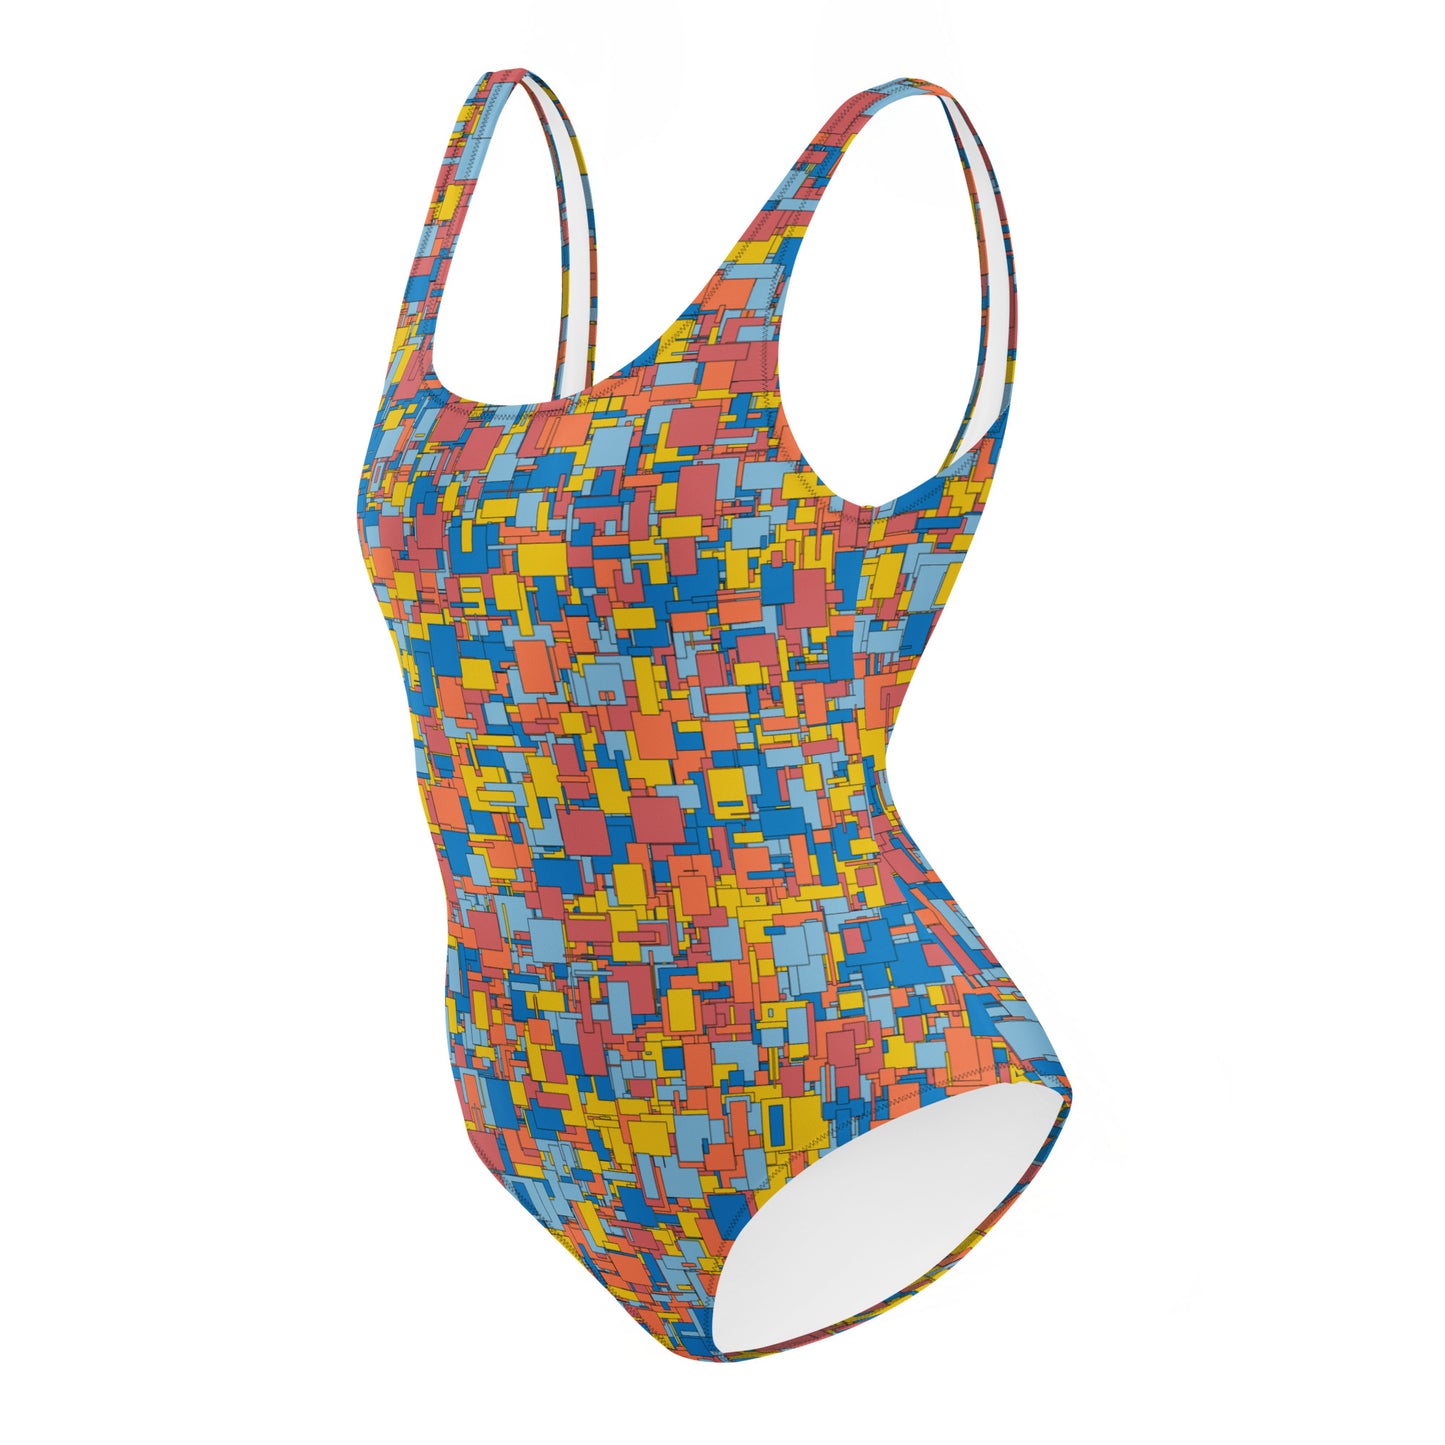 Make a Subtle Statement: Our One-Piece Swimsuit is a Perfect Choice for the Fashion-Forward Woman